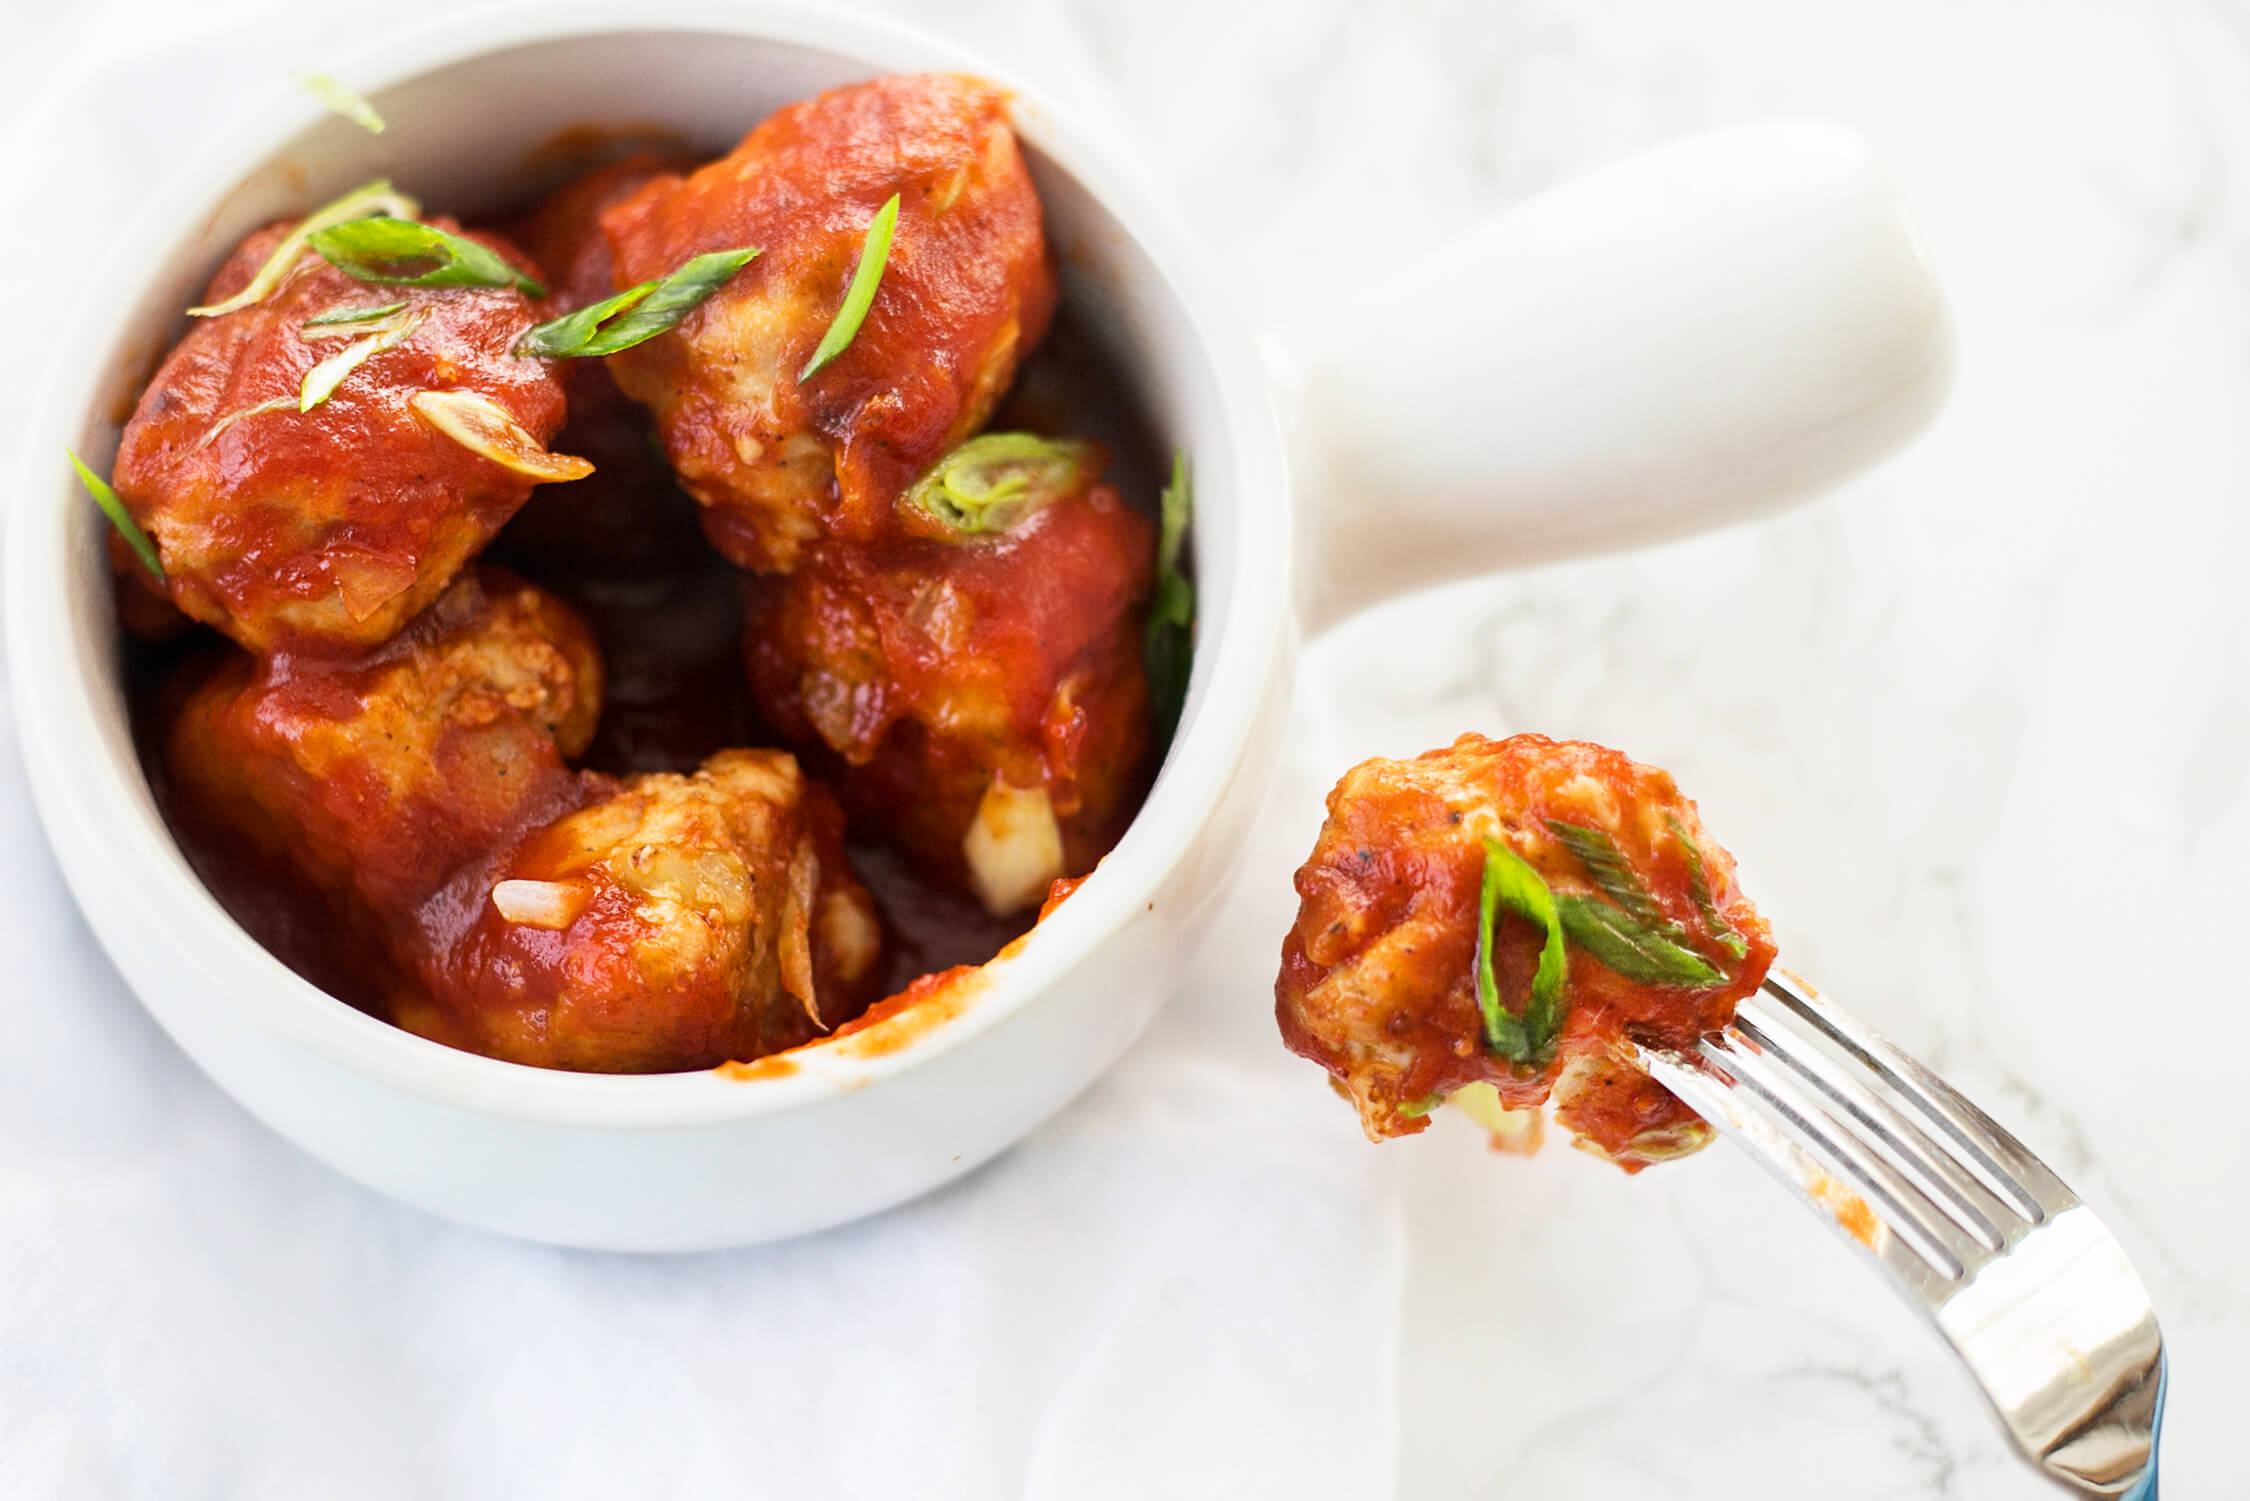 20 Meals Ideas for Kid-Friendly Meal Plans: Honey Chili Meatballs